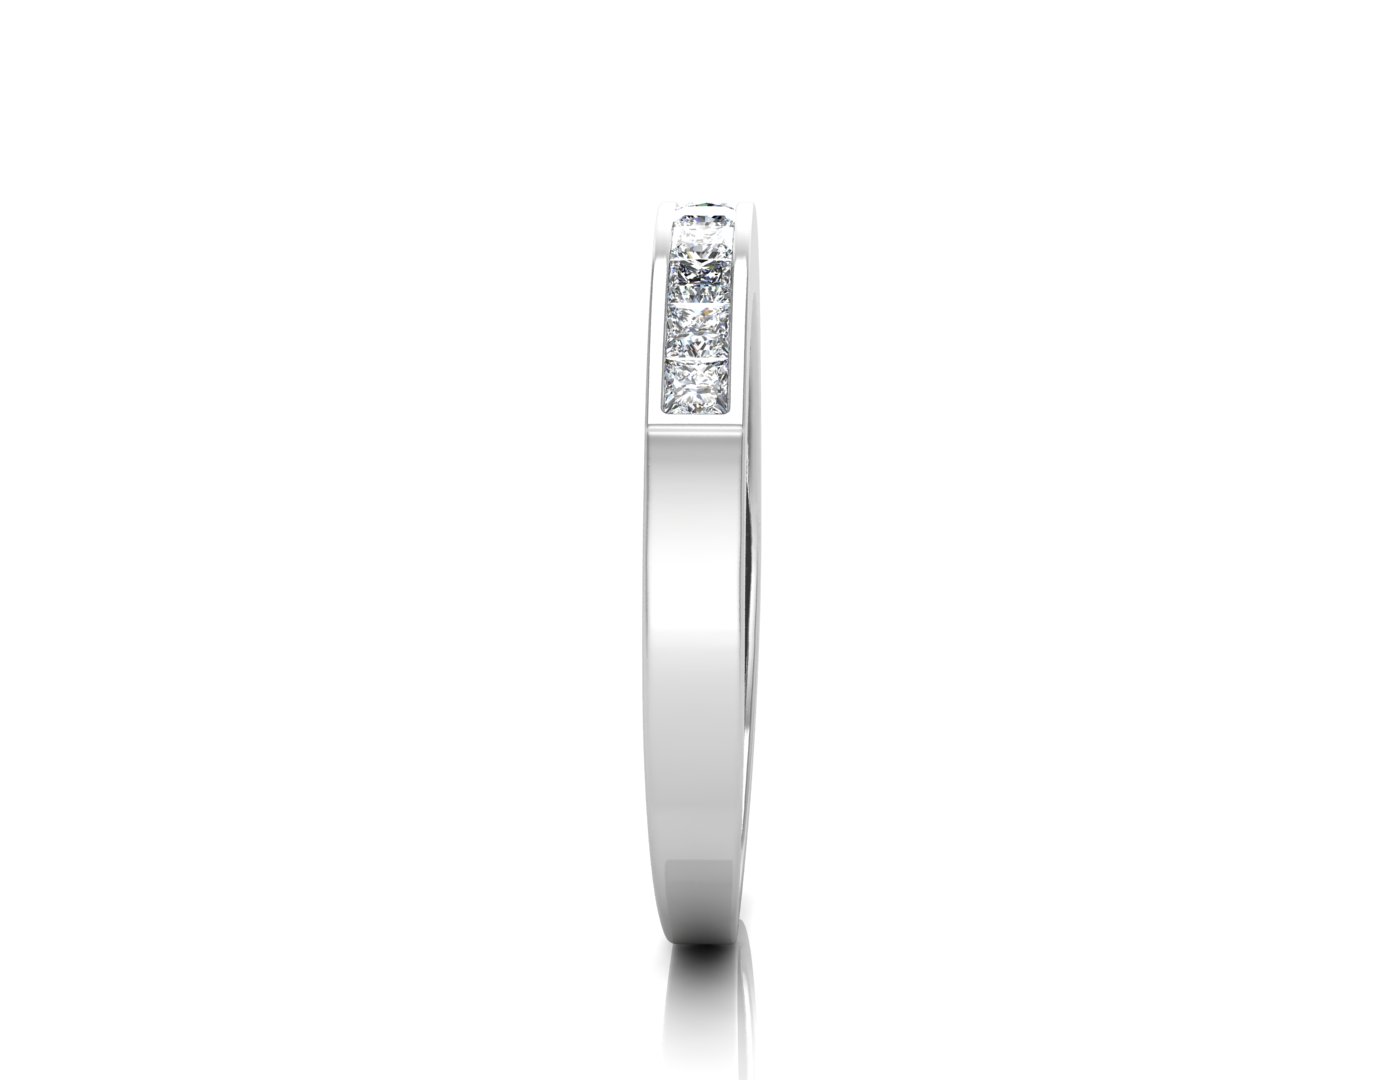 9ct White Gold Channel Set Half Eternity Diamond Ring 0.50 Carats - Image 4 of 6